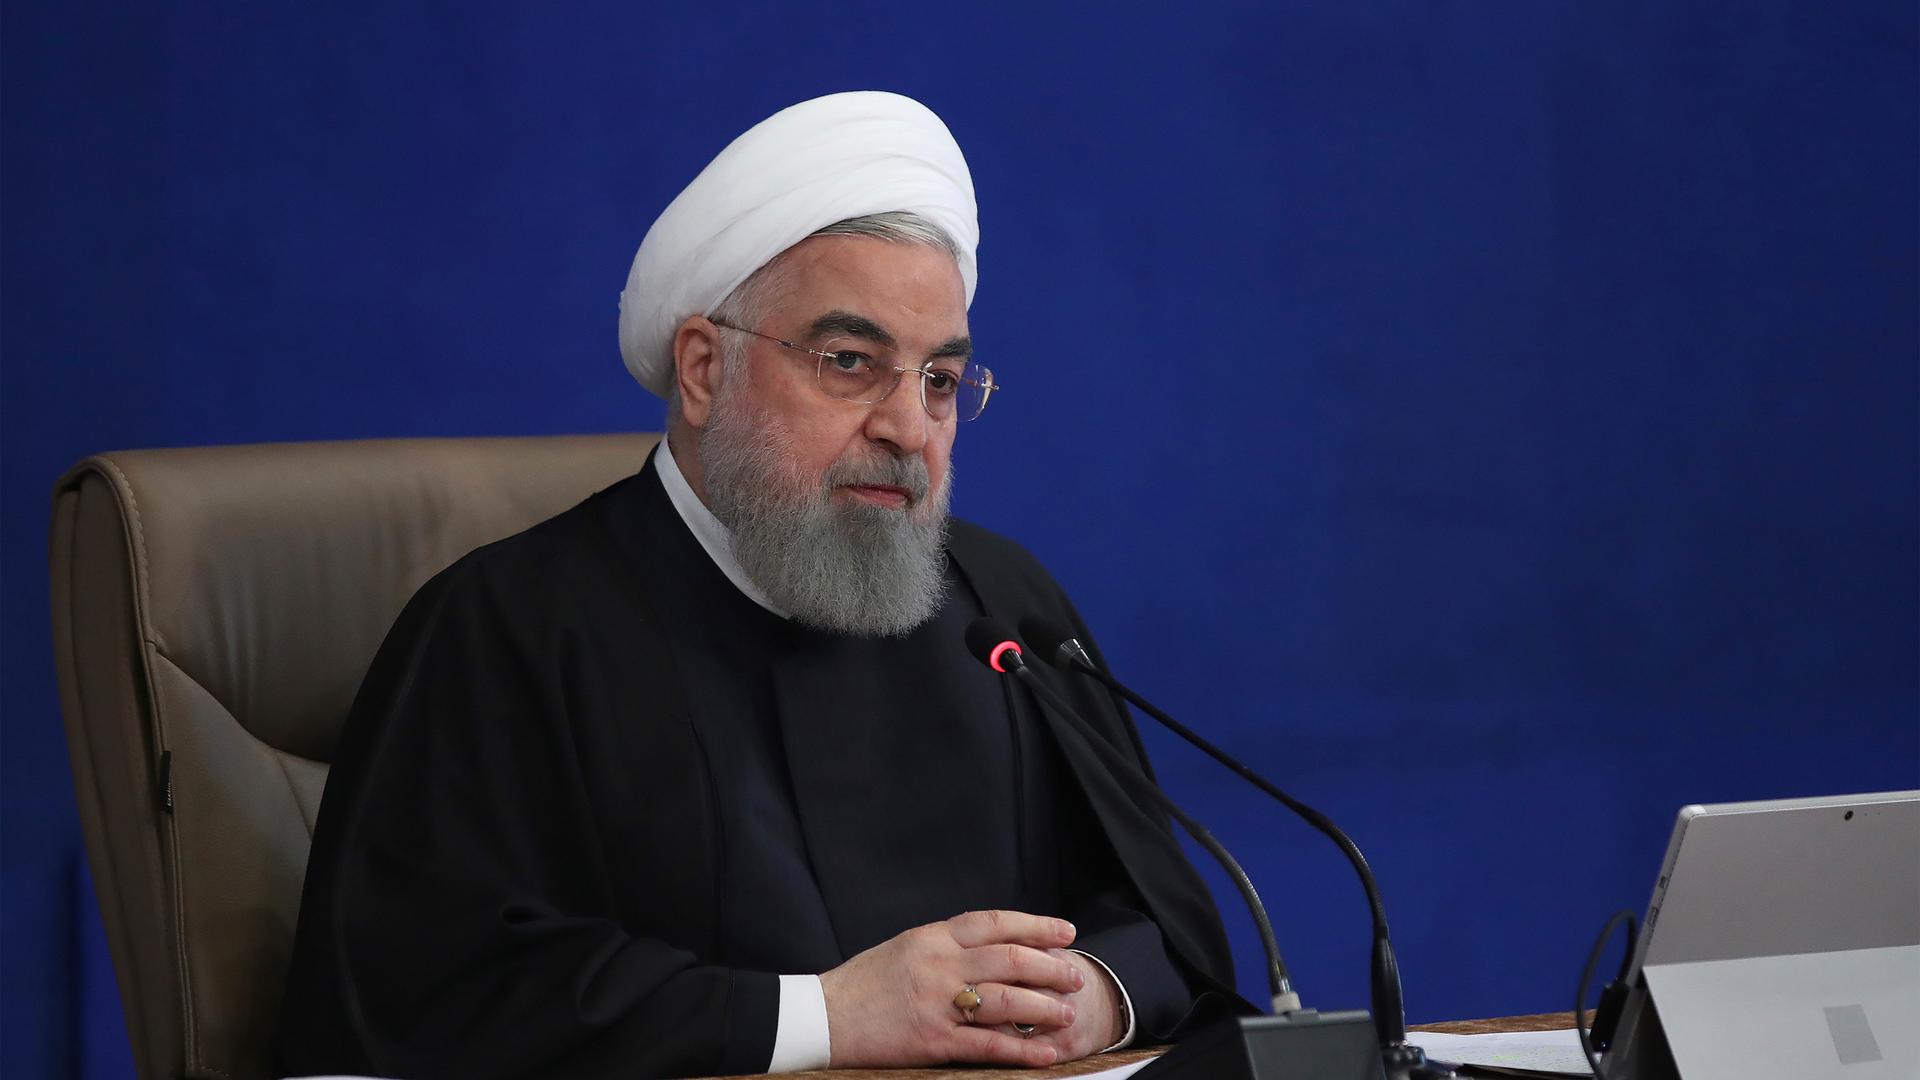 President Hassan Rouhani is shown wearing a dark robe and a traditional white turban while sitting.